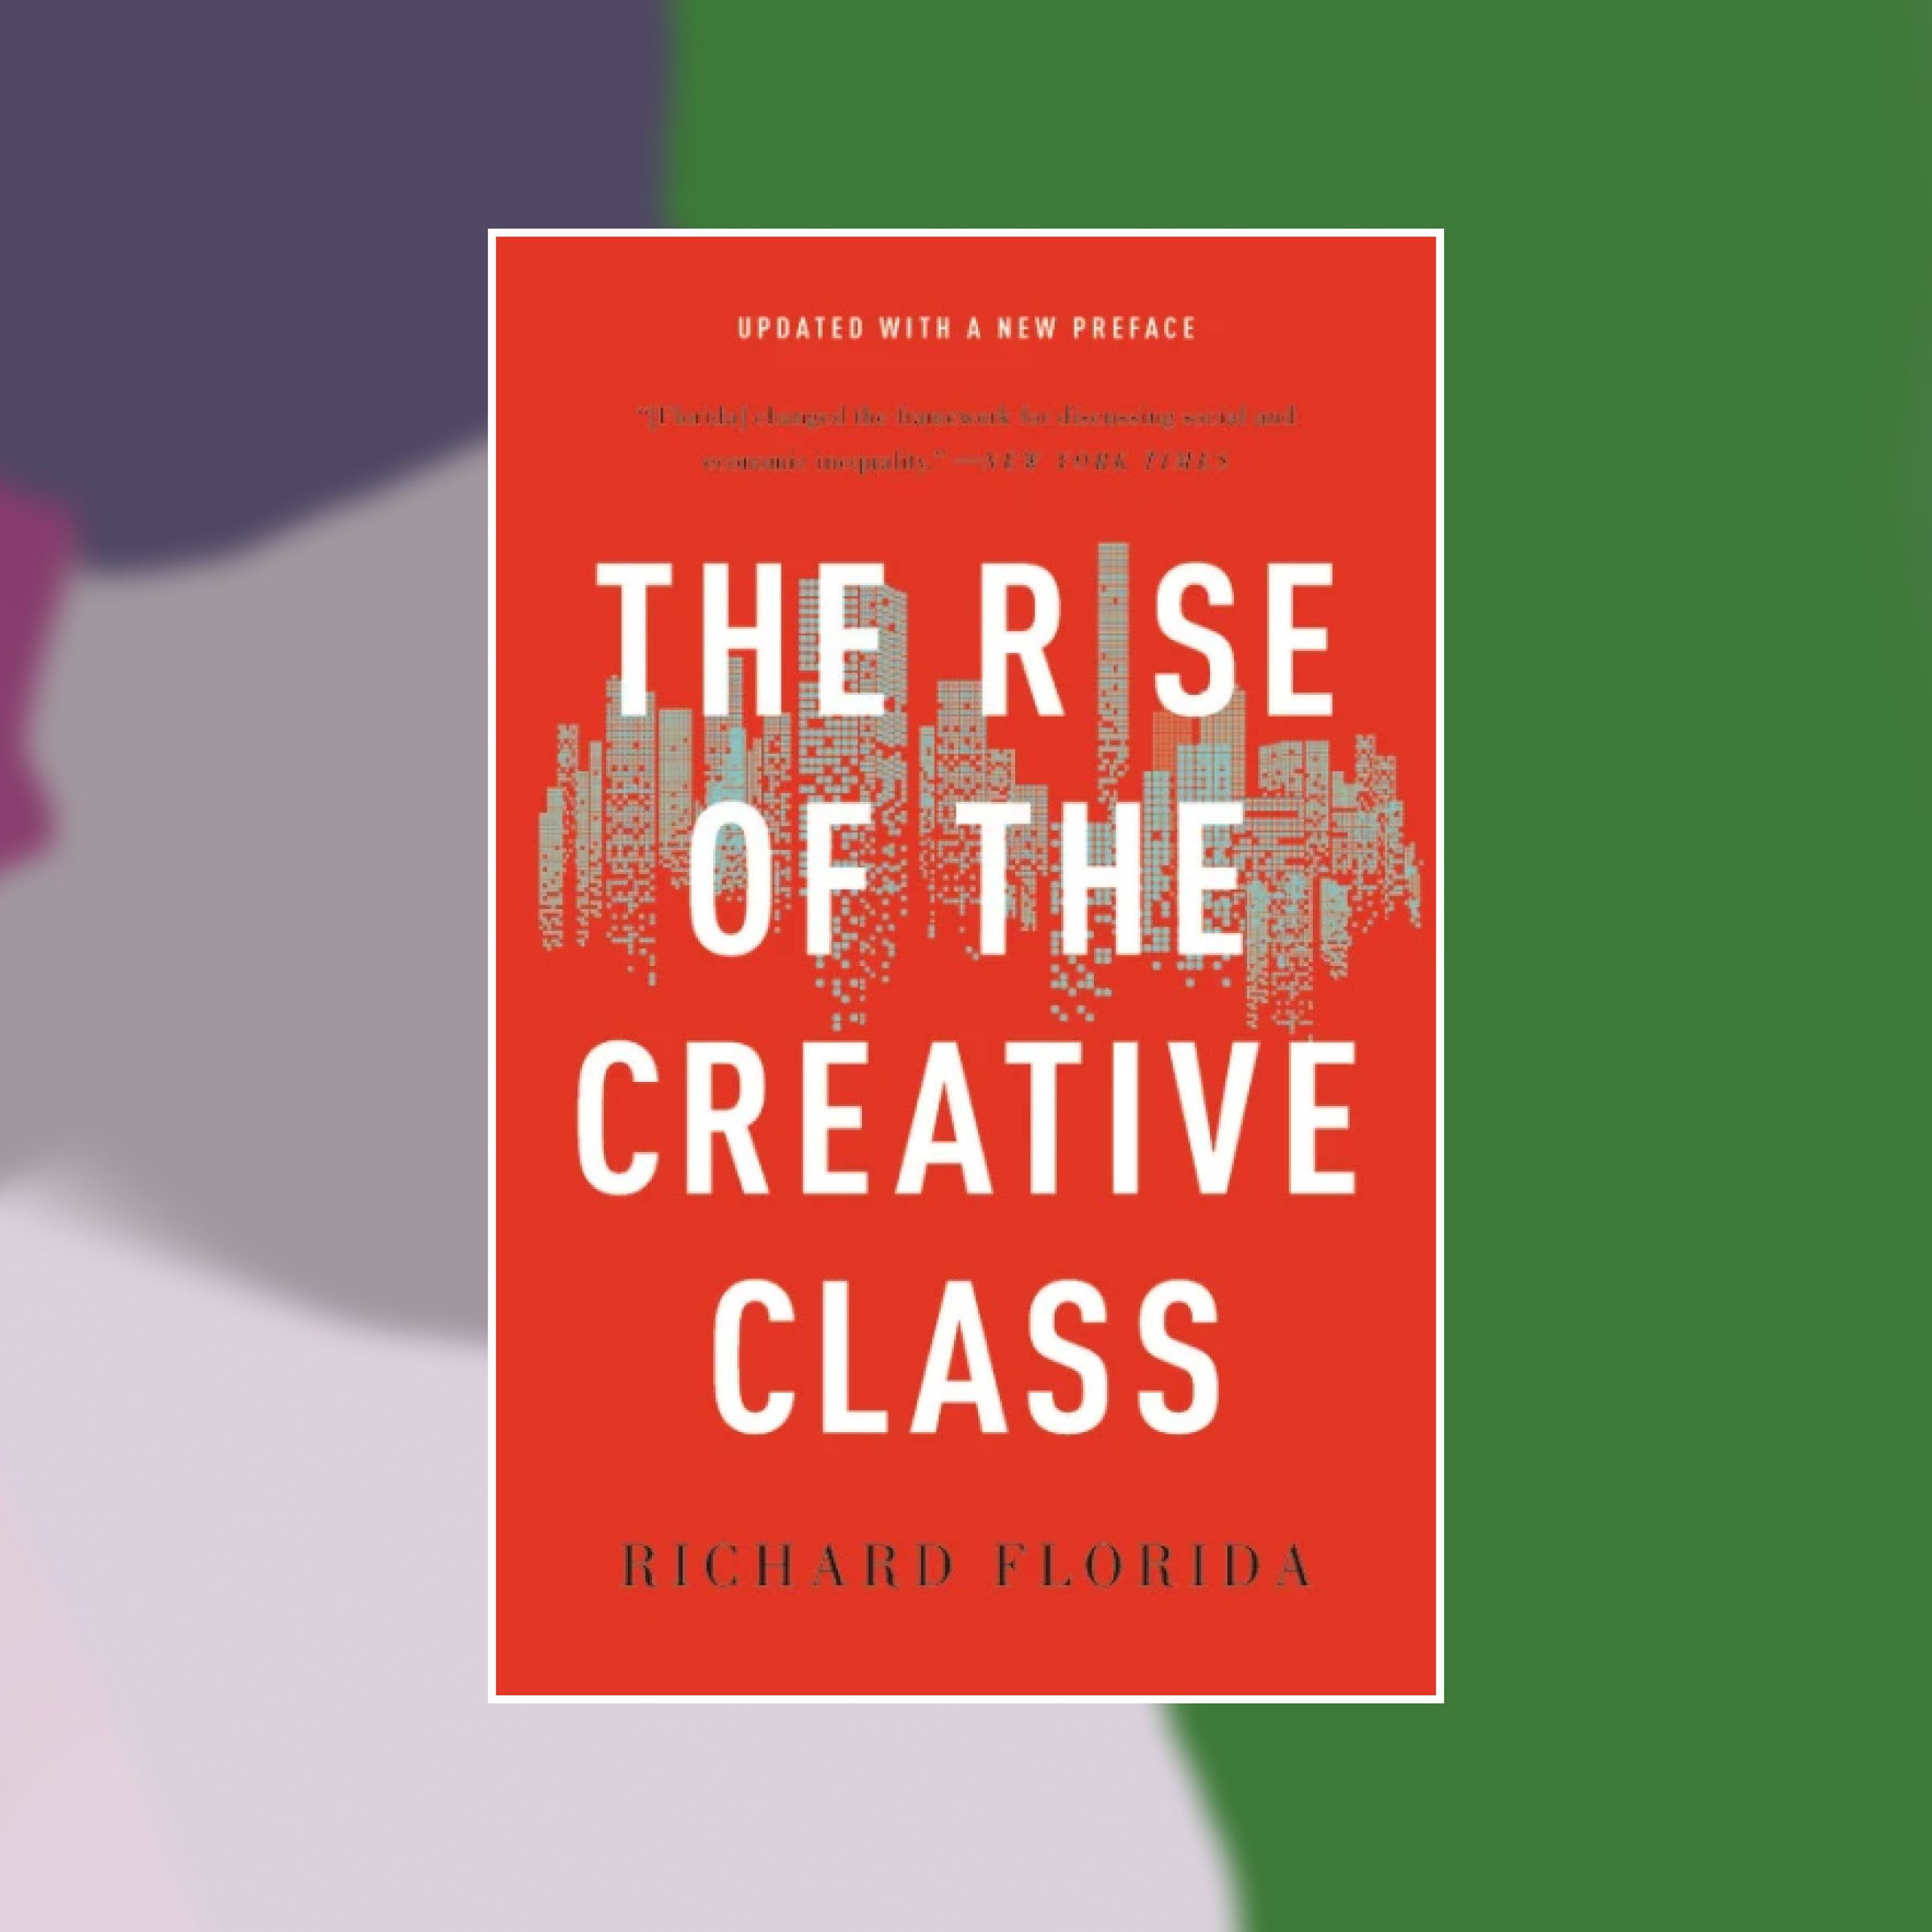 Book cover of The Rise of the Creative Class against an abstract painted background